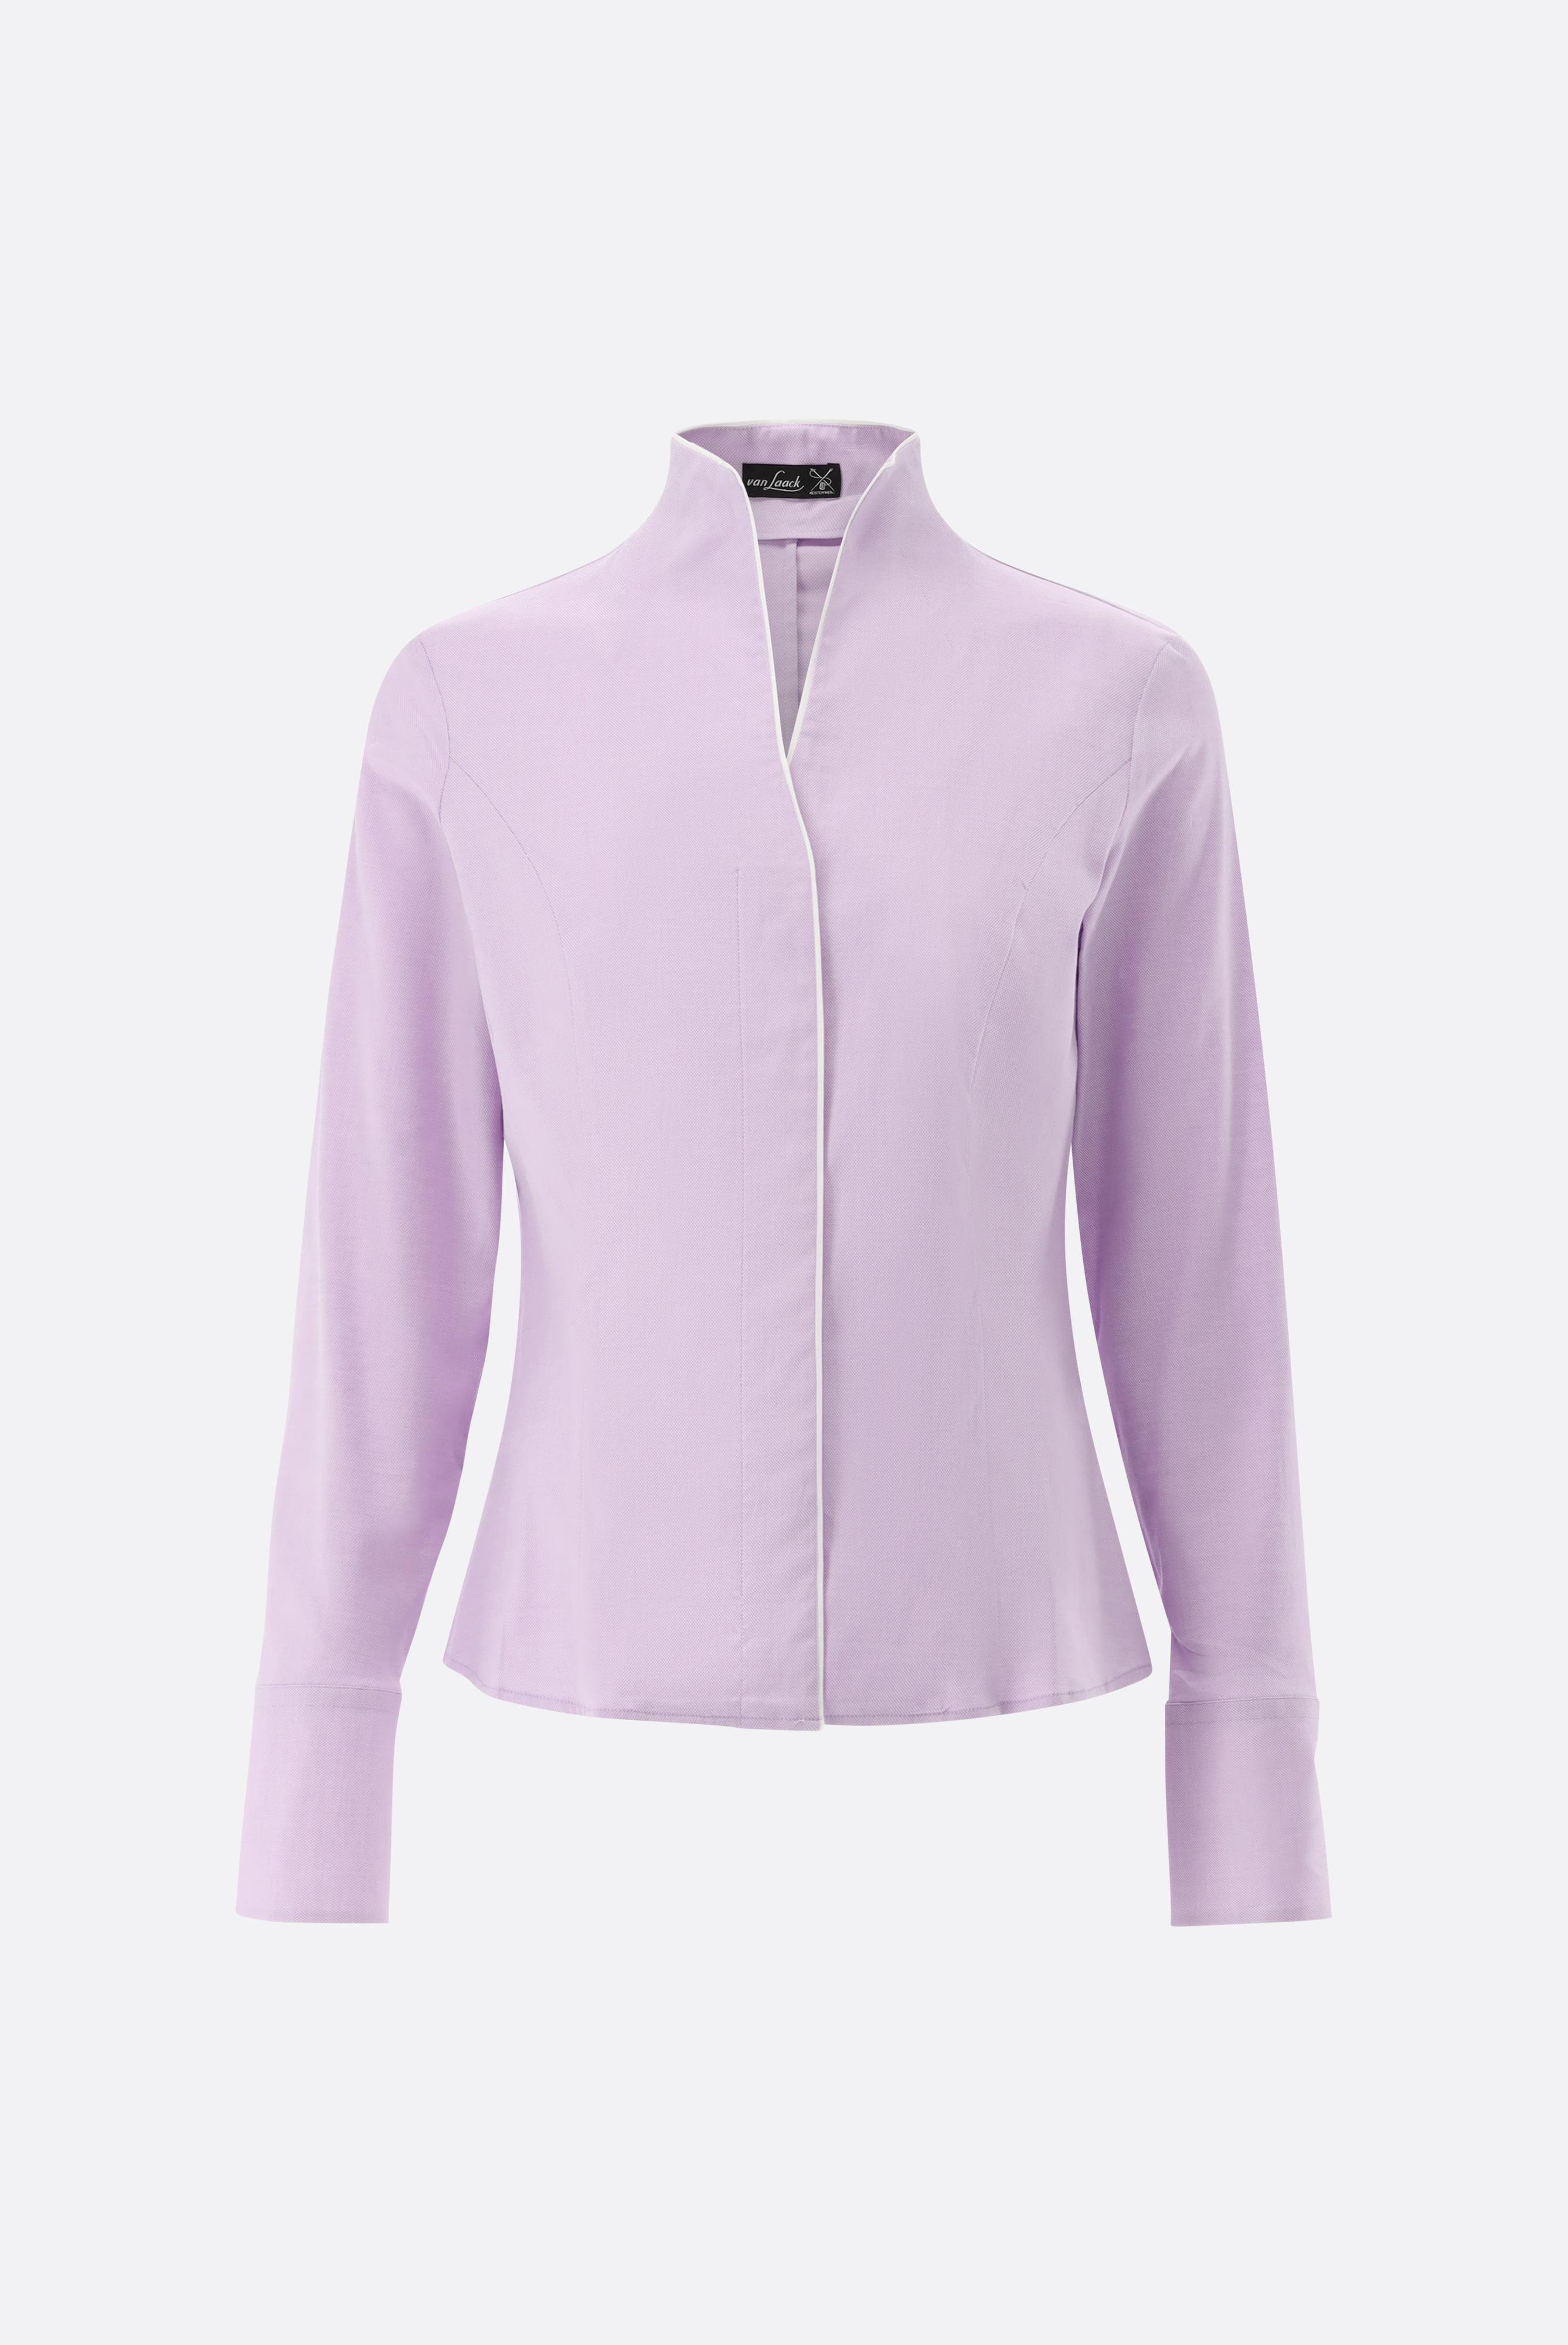 Business Blouses+Wrinkle-free Chalice Collar Blouse in Cotton Stretch+05.3612.D4.150272.610.32